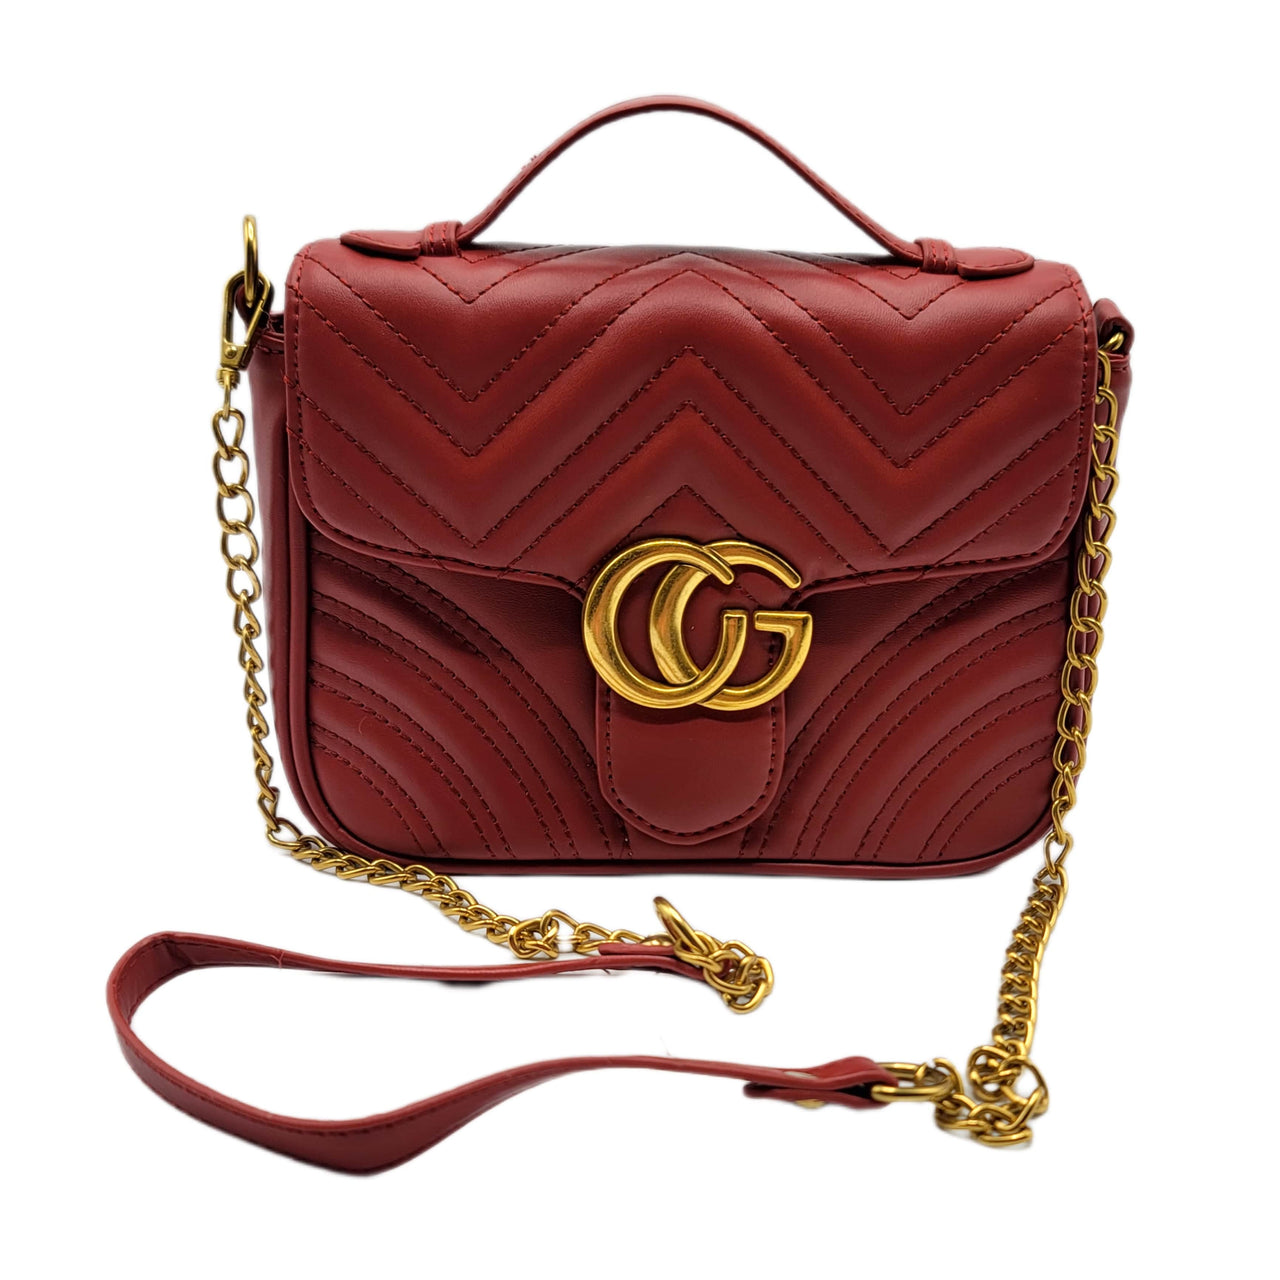 The Bag Couture Handbags, Wallets & Cases Gucci Marmont Crossbody Bag Maroon